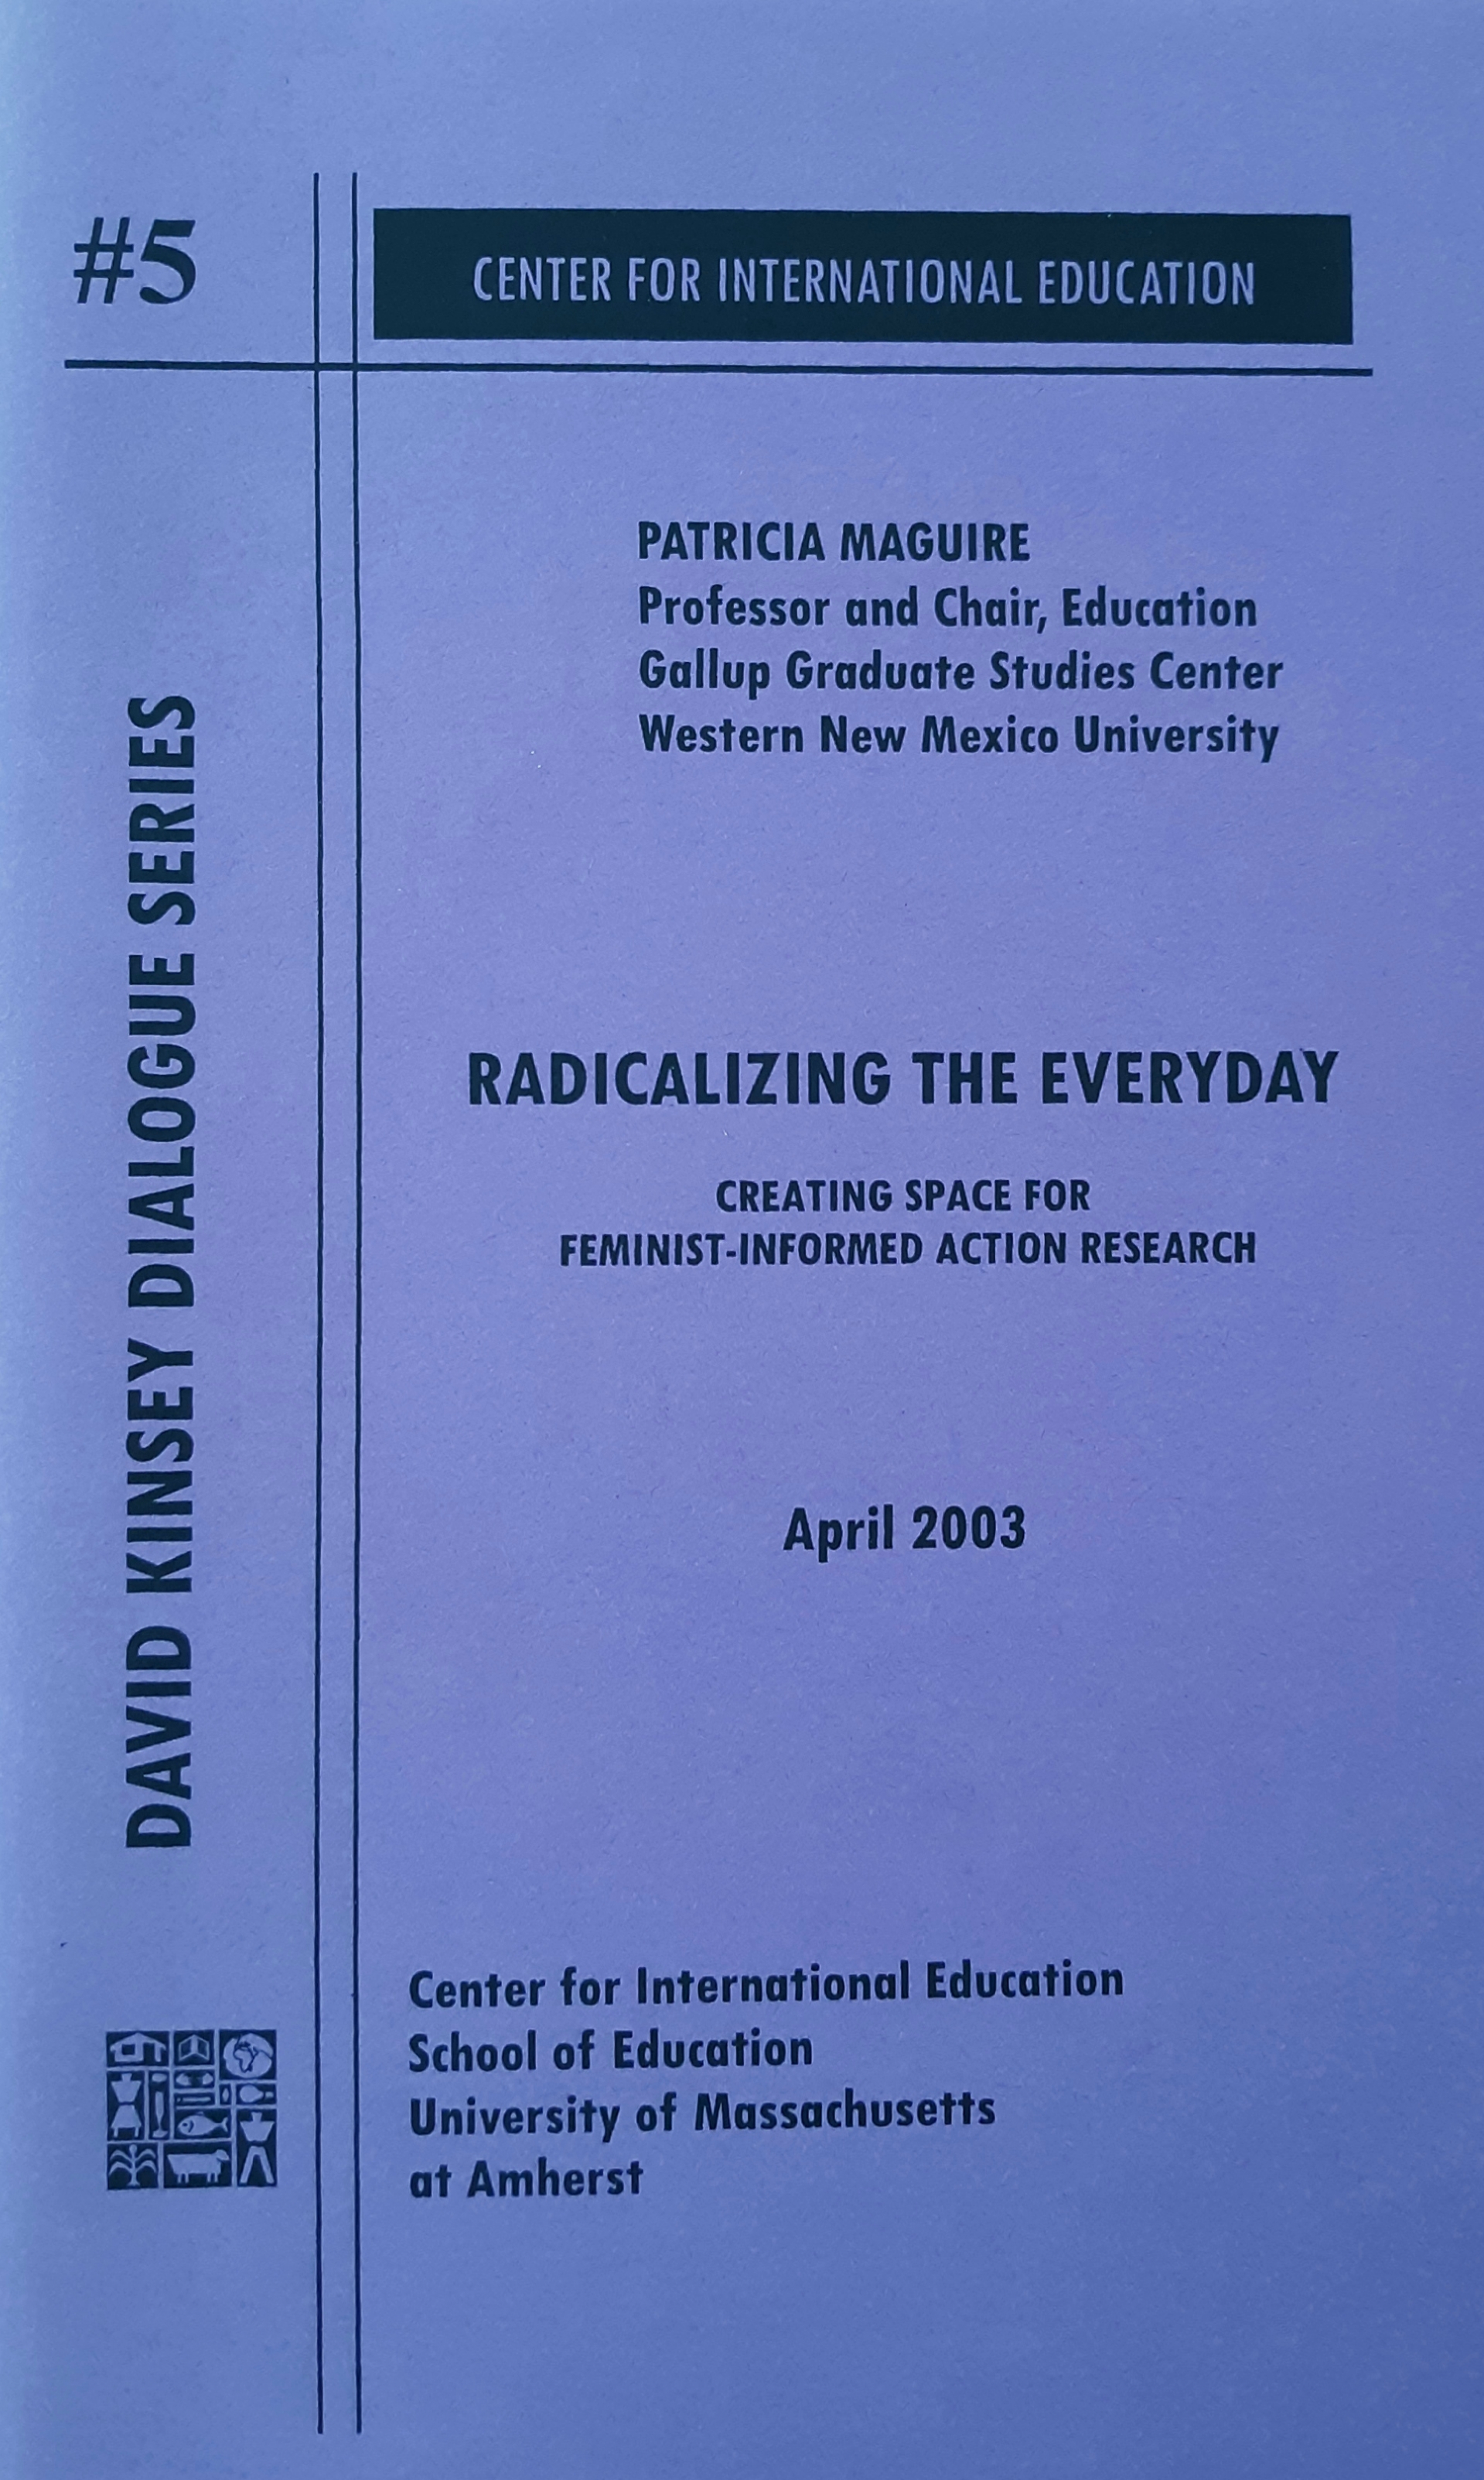 Radicalizing the everyday: feminisms and participatory action research